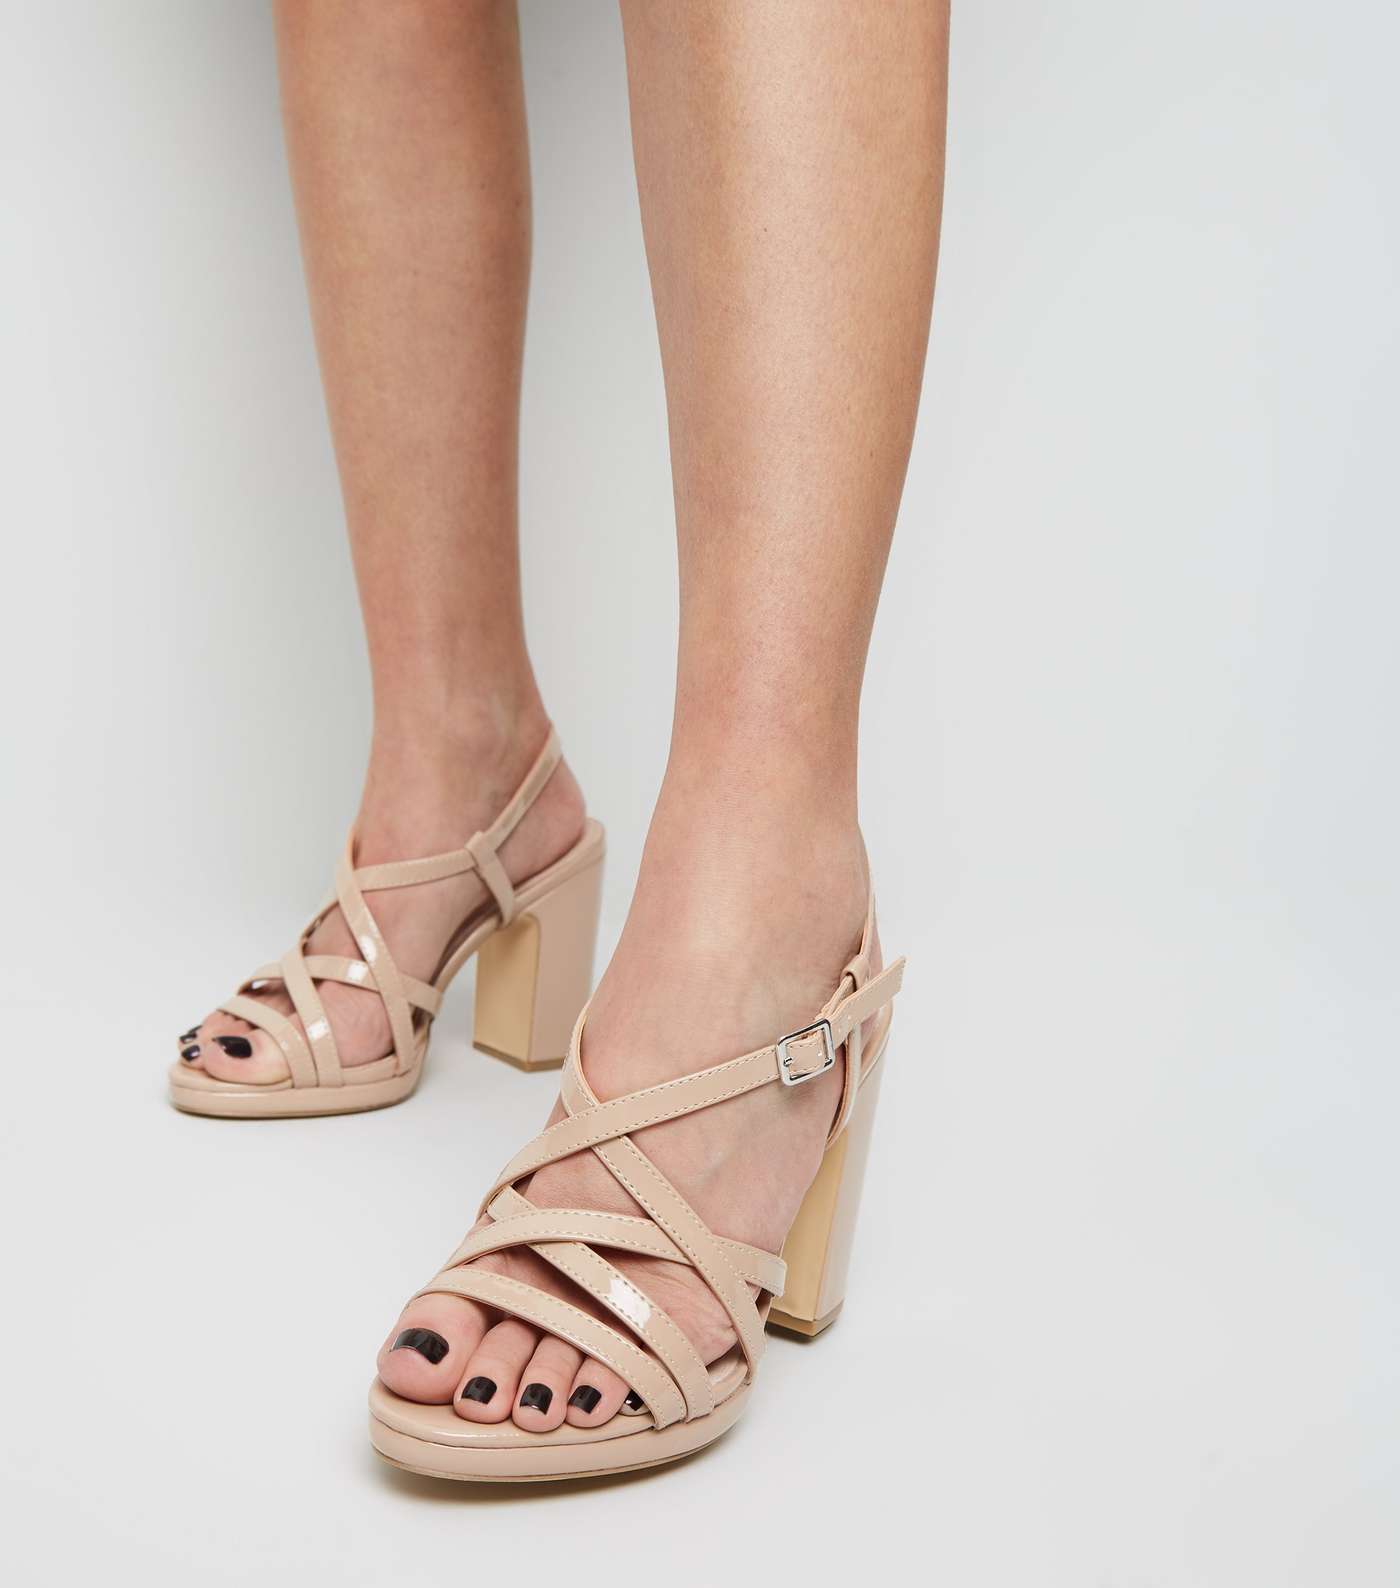 Nude Comfort Flex Patent Strappy Heeled Sandals Image 2